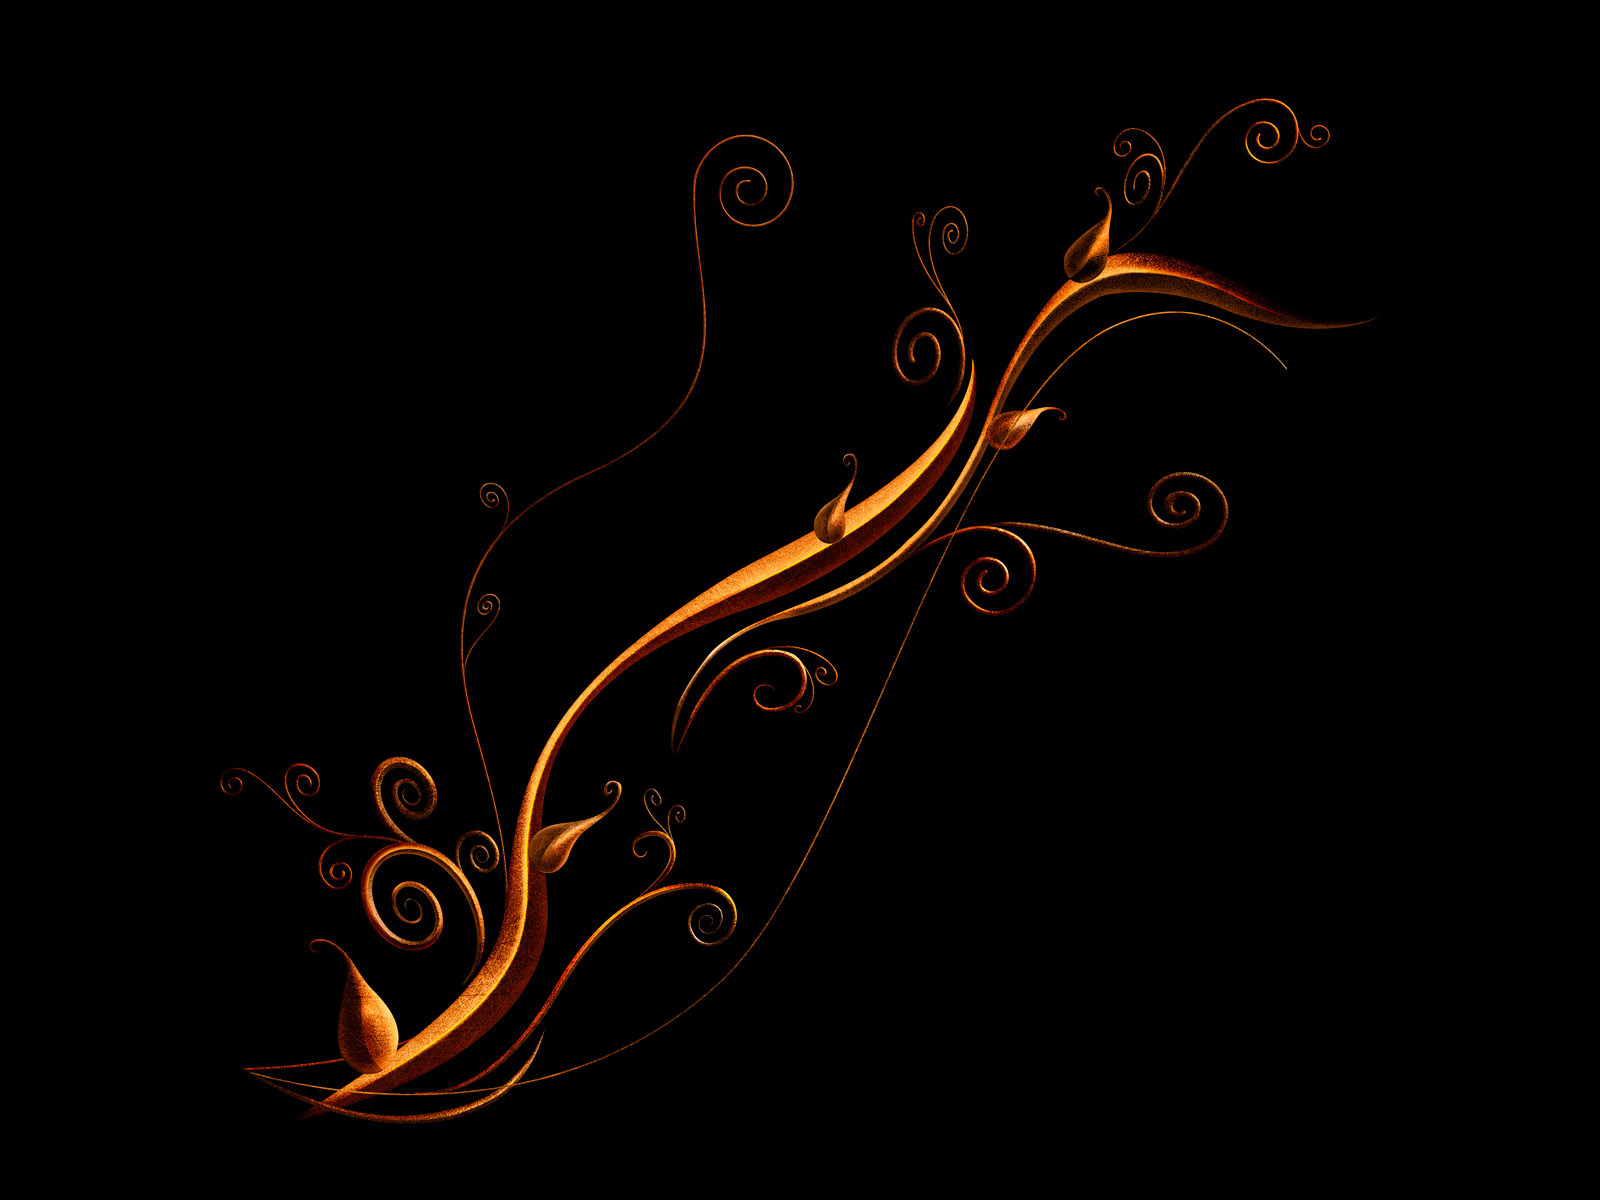 10686 download wallpaper black, abstract, background screensavers and pictures for free